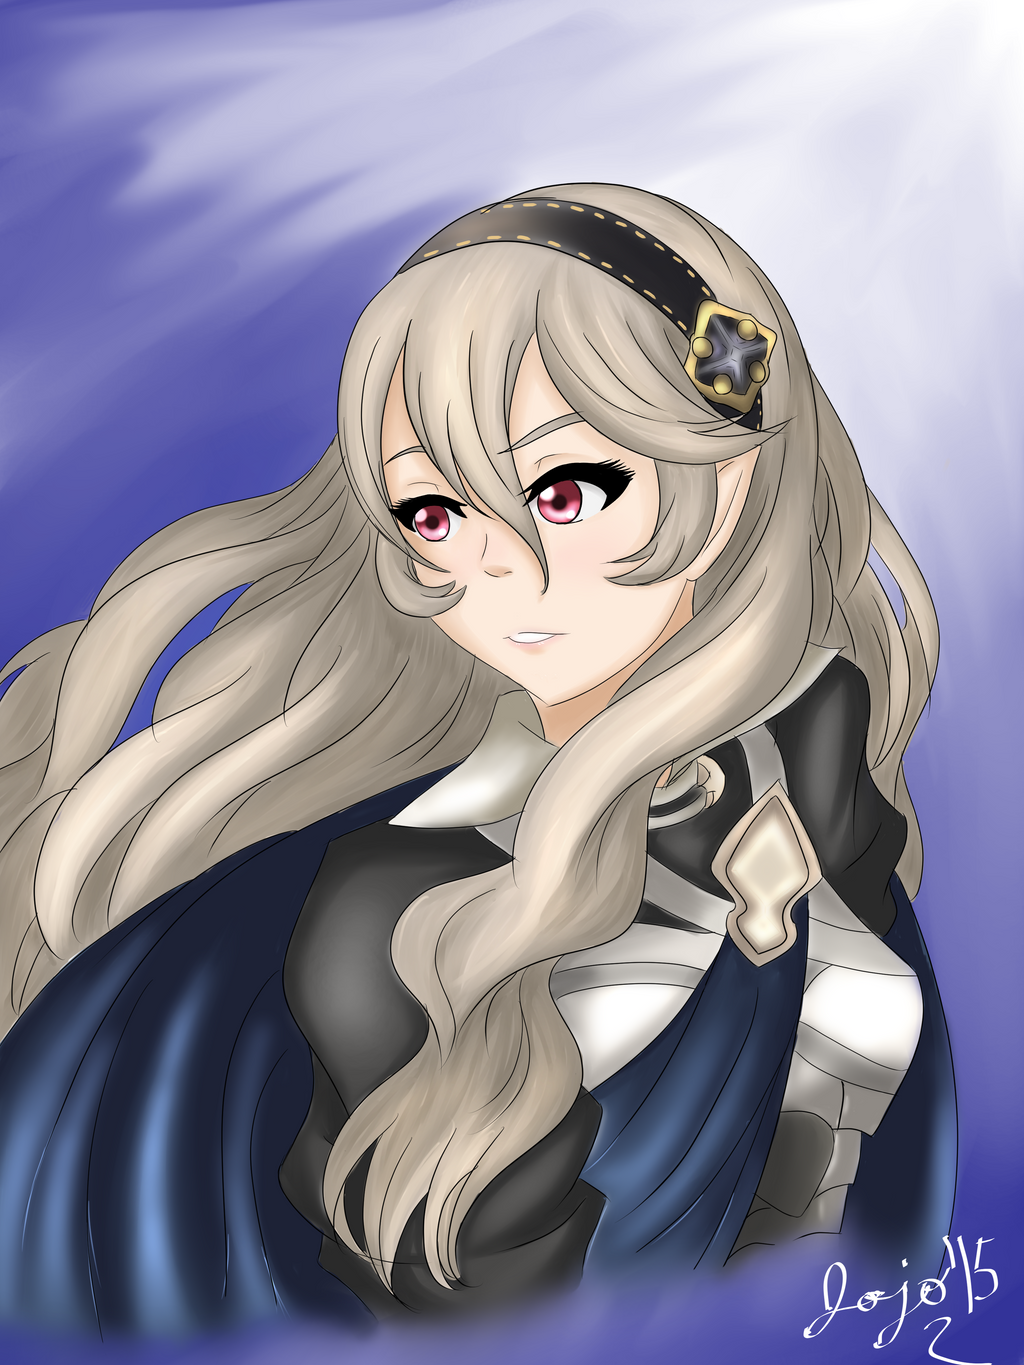 Female Kamui - Fire Emblem Fates by TheCherryTree59 on DeviantArt